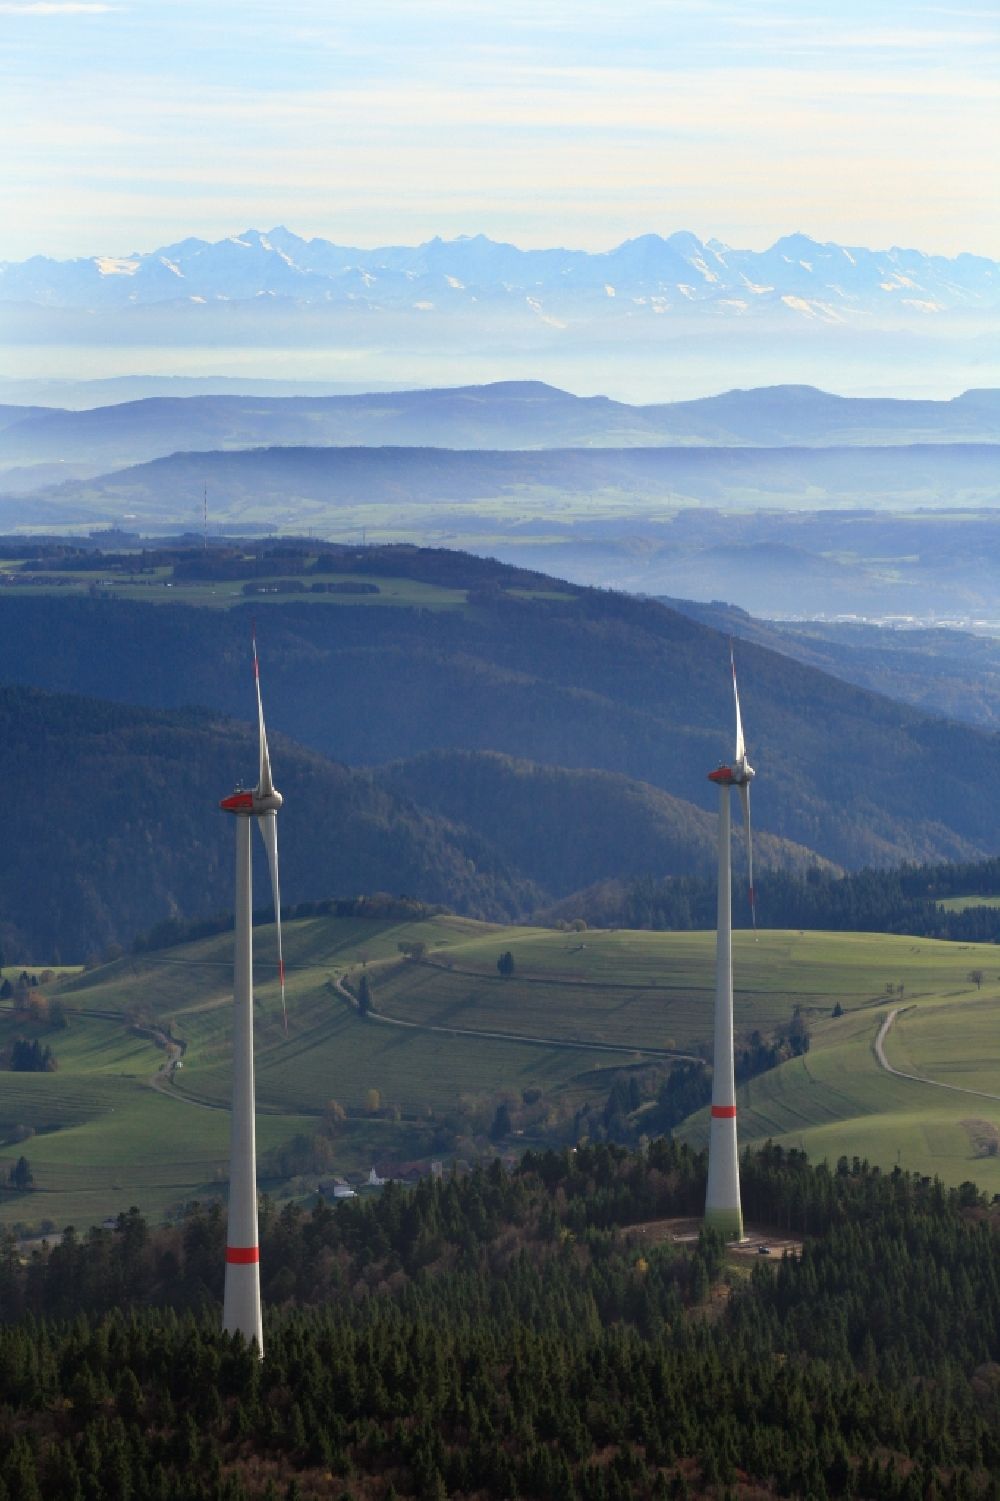 Schopfheim from the bird's eye view: Looking over two wind turbines of the wind farm Rohrenkopf in the Southern Black Forest in Gersbach, Baden-Wuerttemberg. Looking southbound to the Swiss Alps